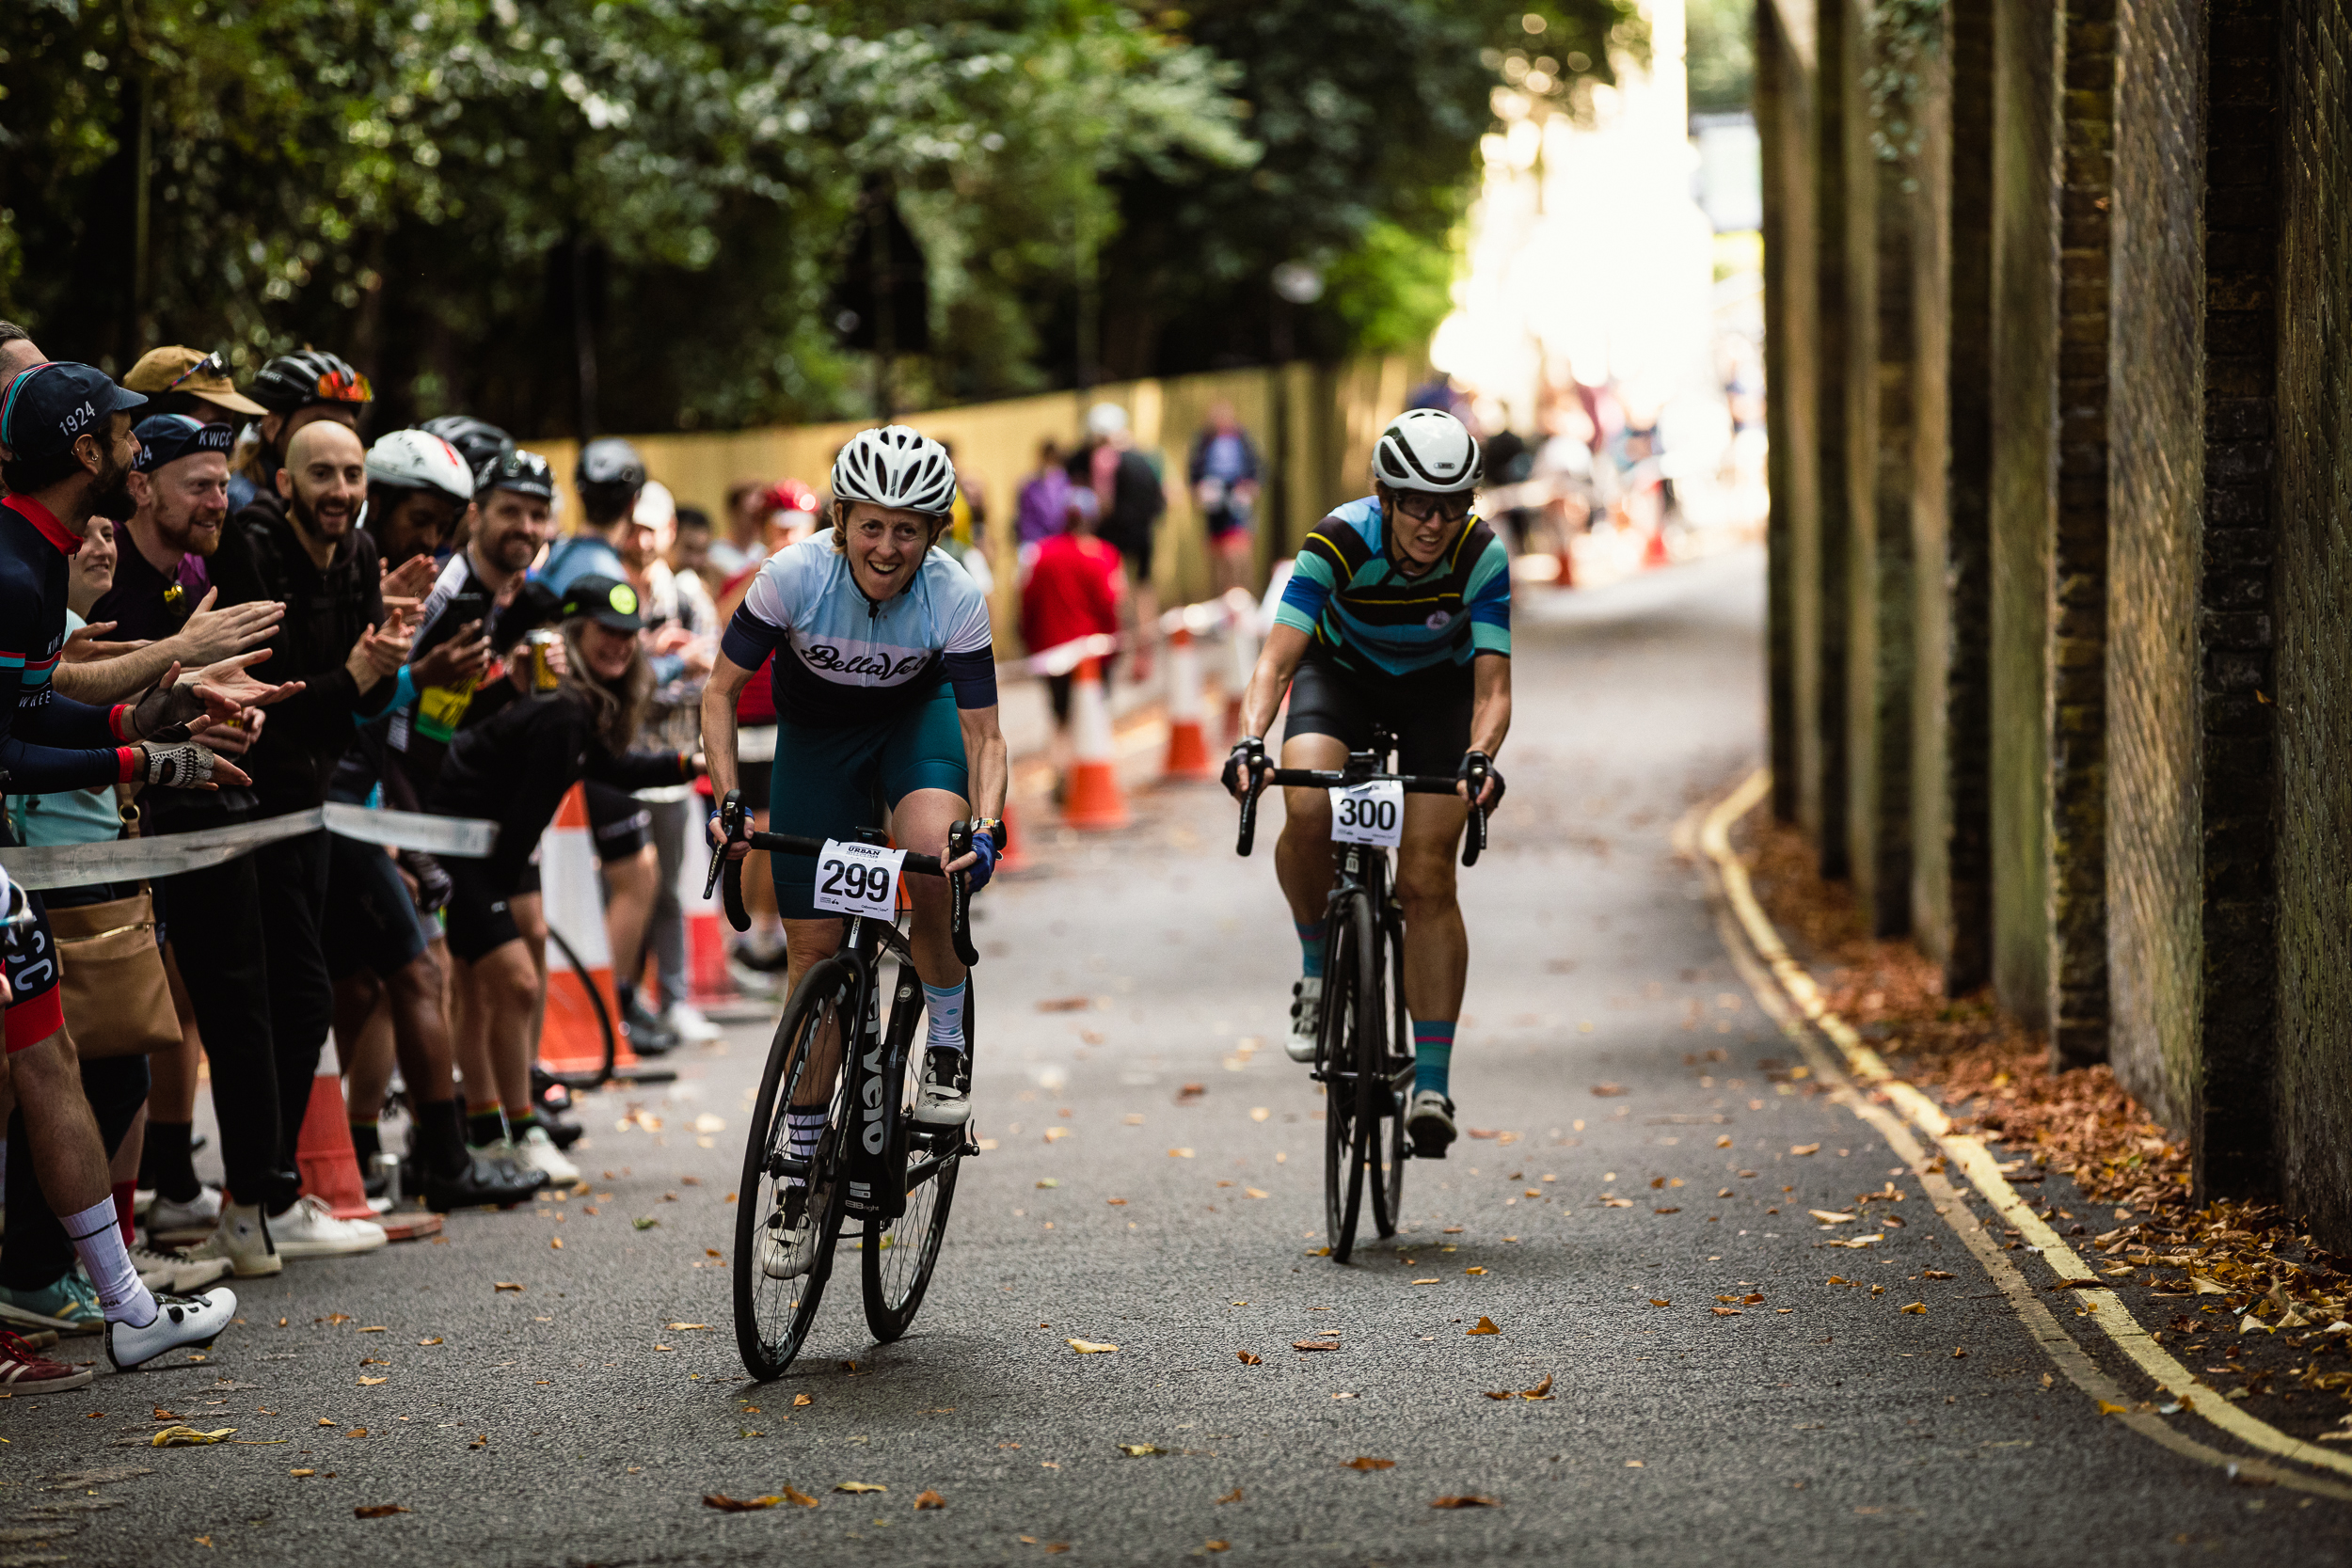 Woman racing up hill at Urban Hill Climb challenge event